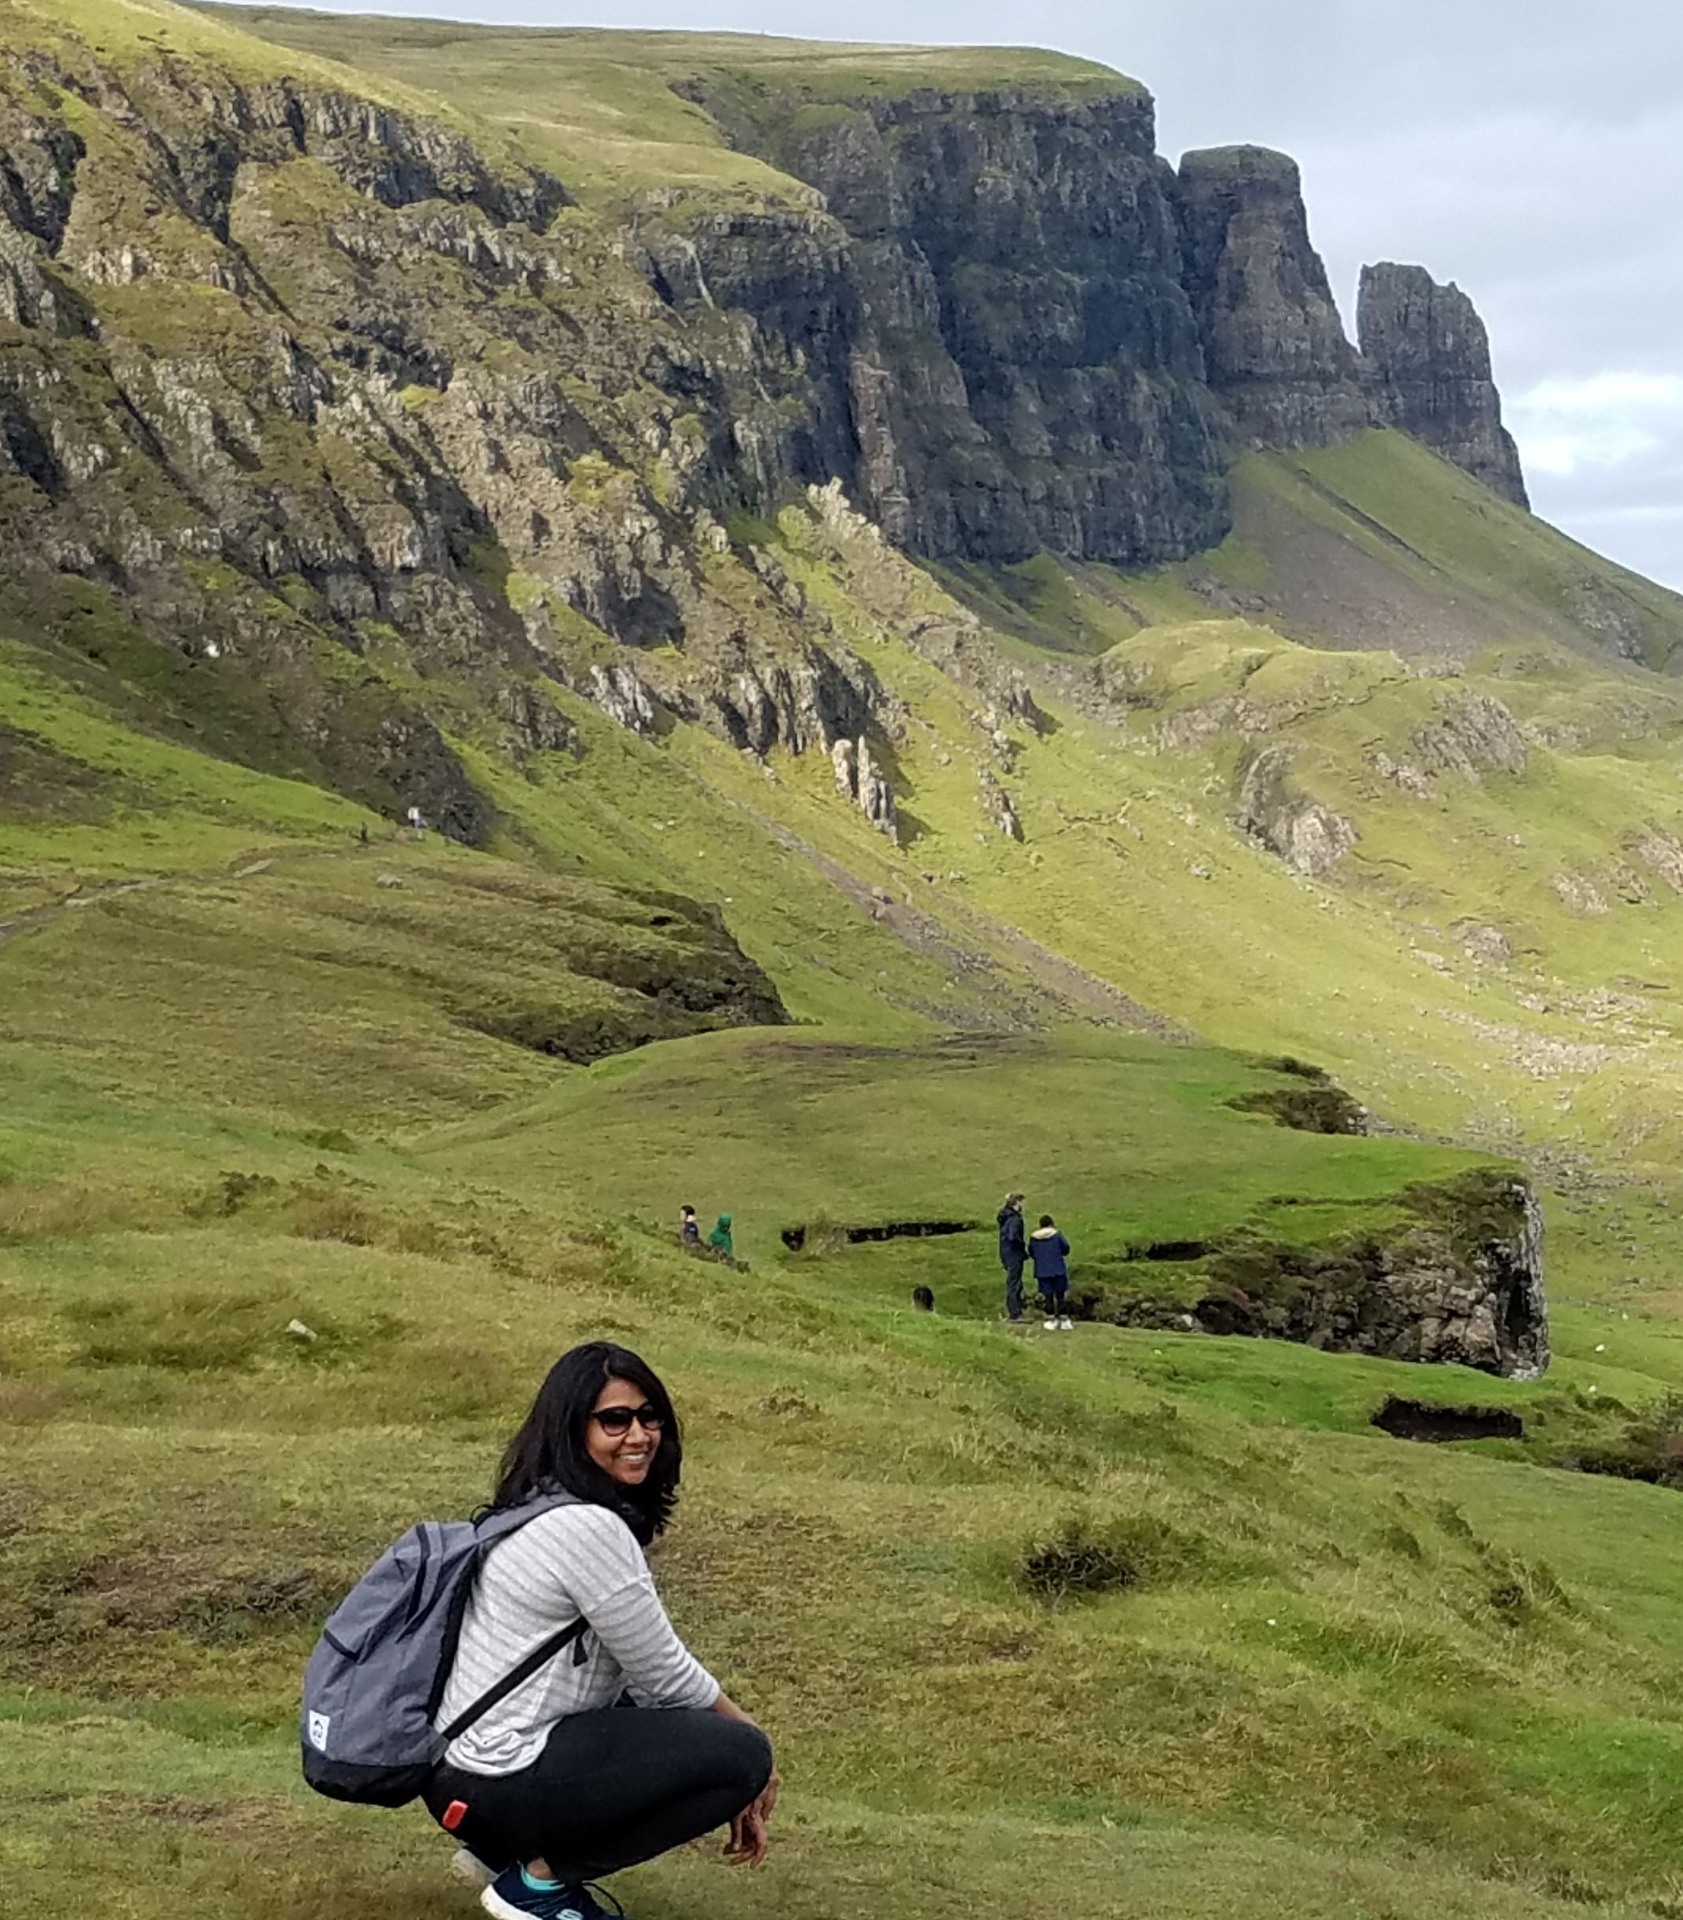 Posing in the Isle of Skye | Copyright image | From The Corner Table